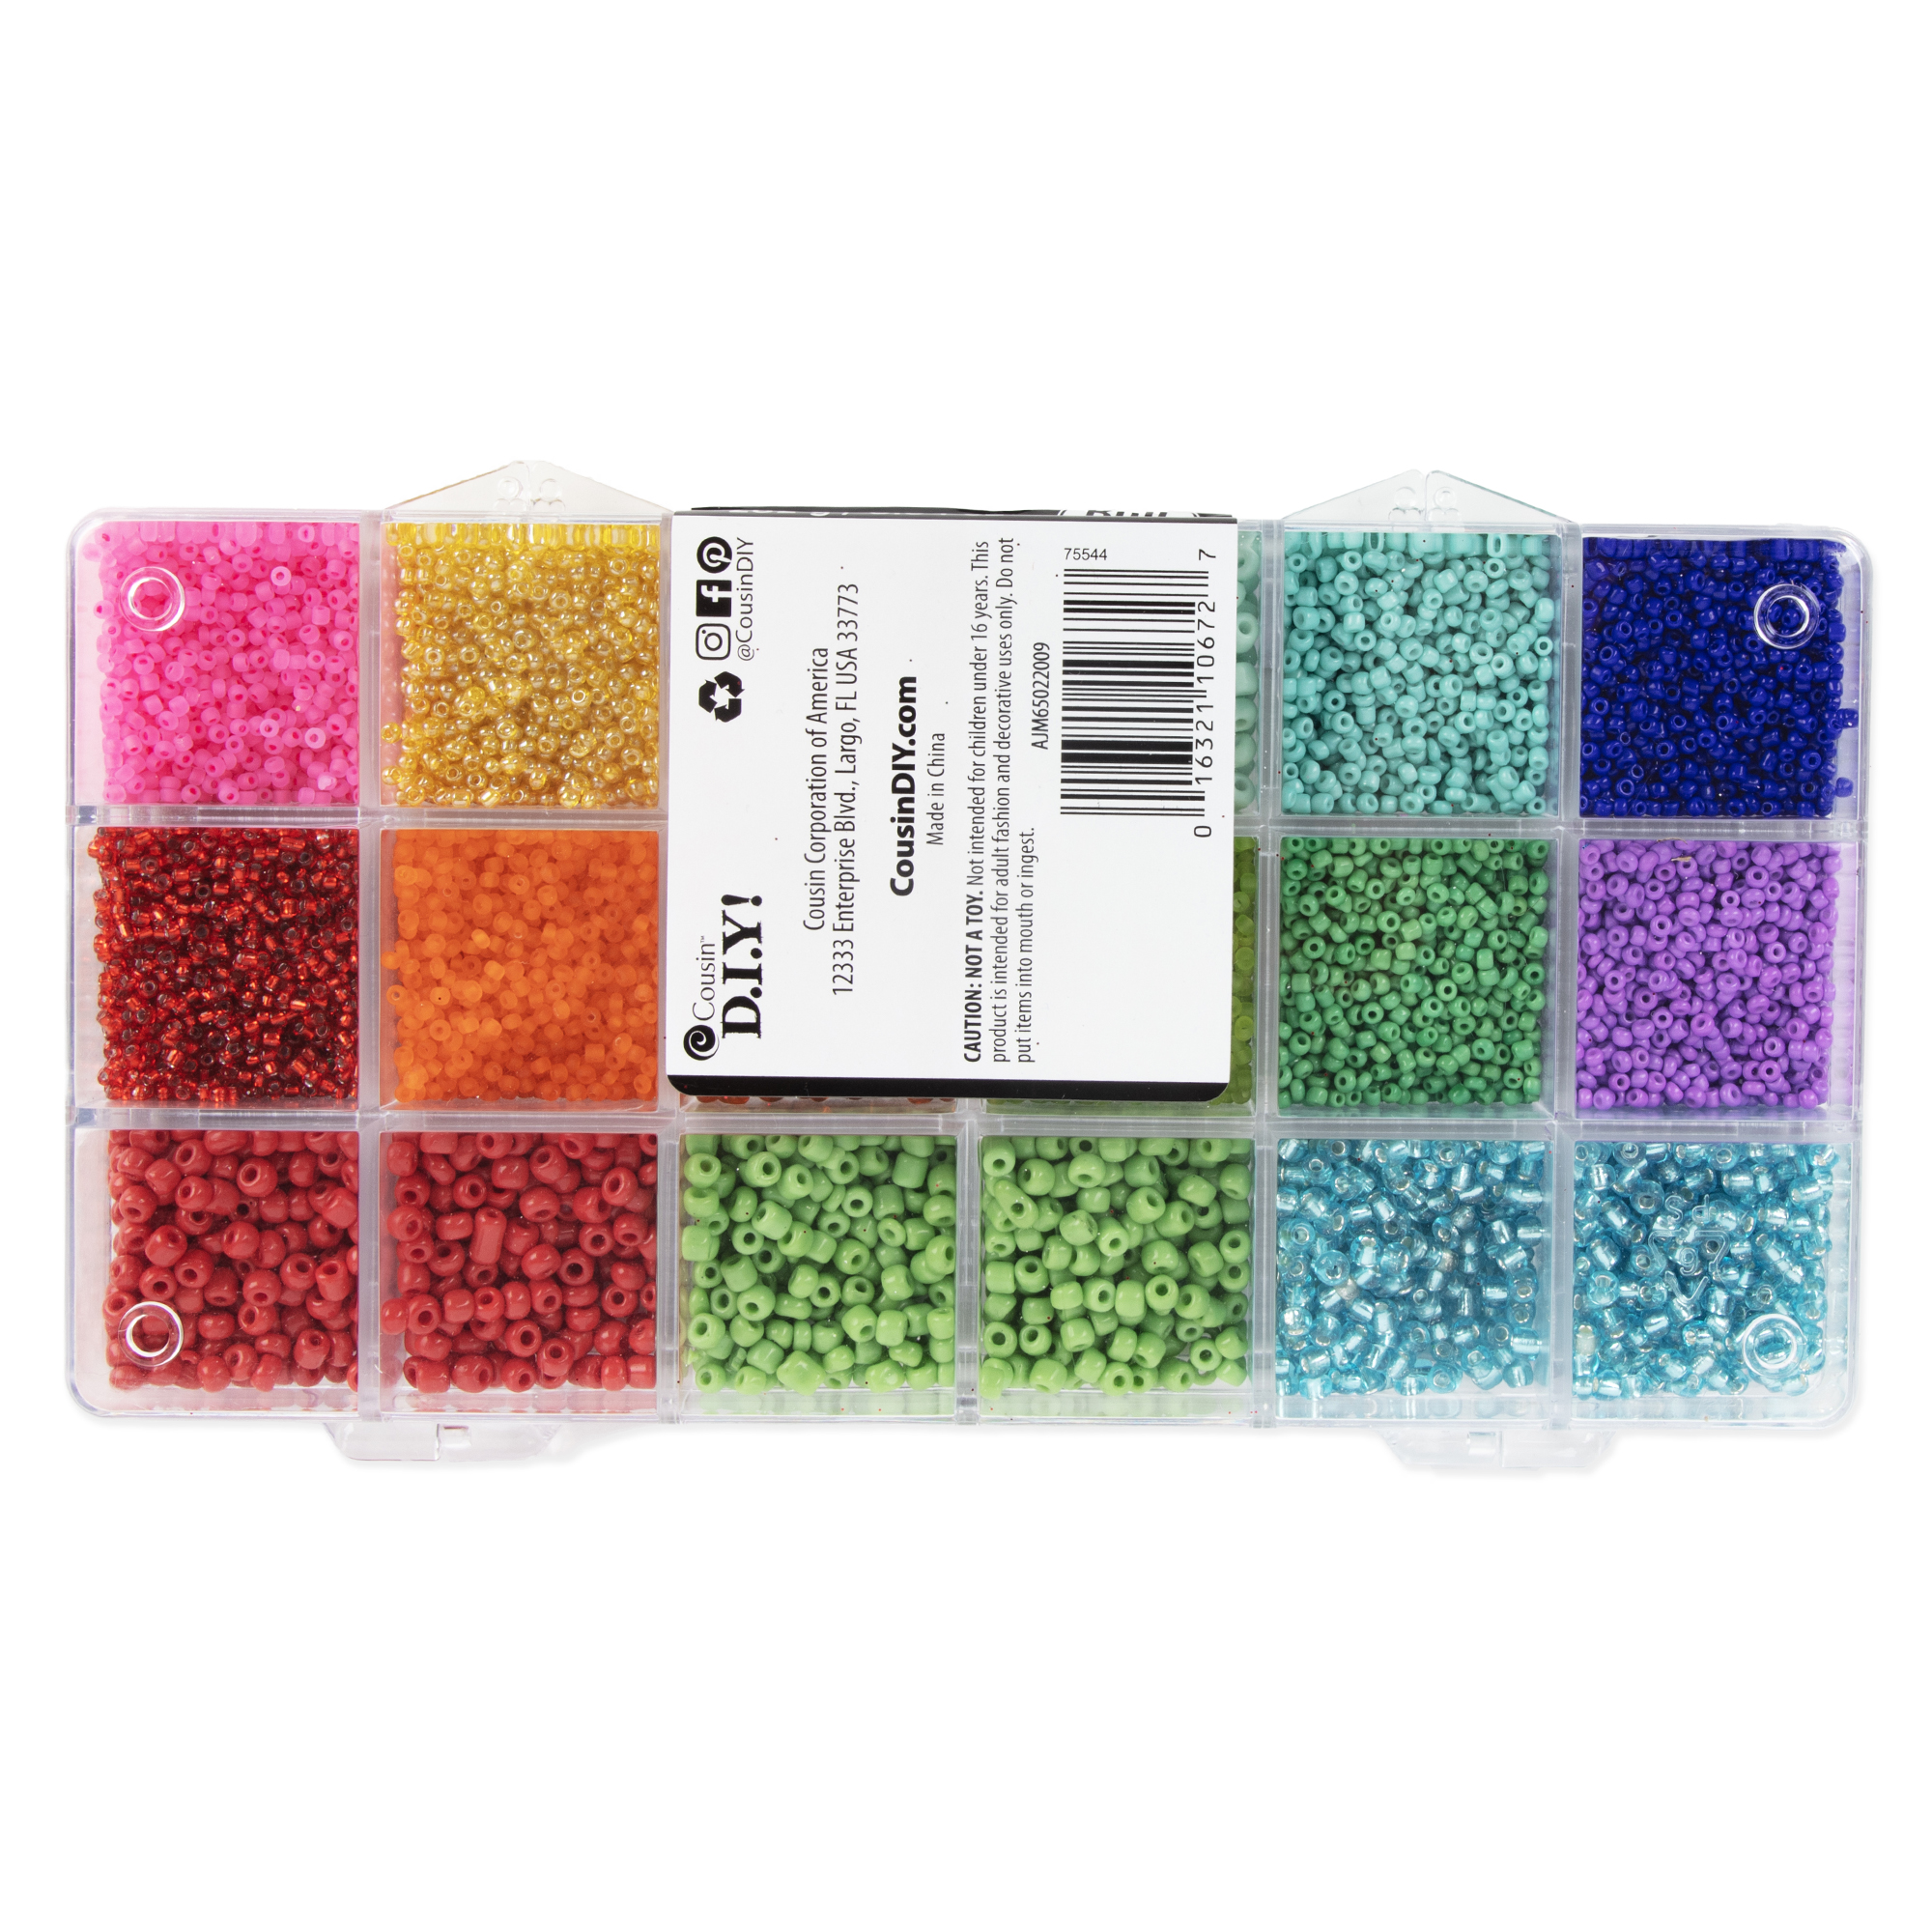 Cousin DIY Bright Rainbow Mix Glass Seed Bead Value Bulk Pack, Model AJM65022009, 1000+ Pc, Colorful Unisex Beads for Adults - image 3 of 8